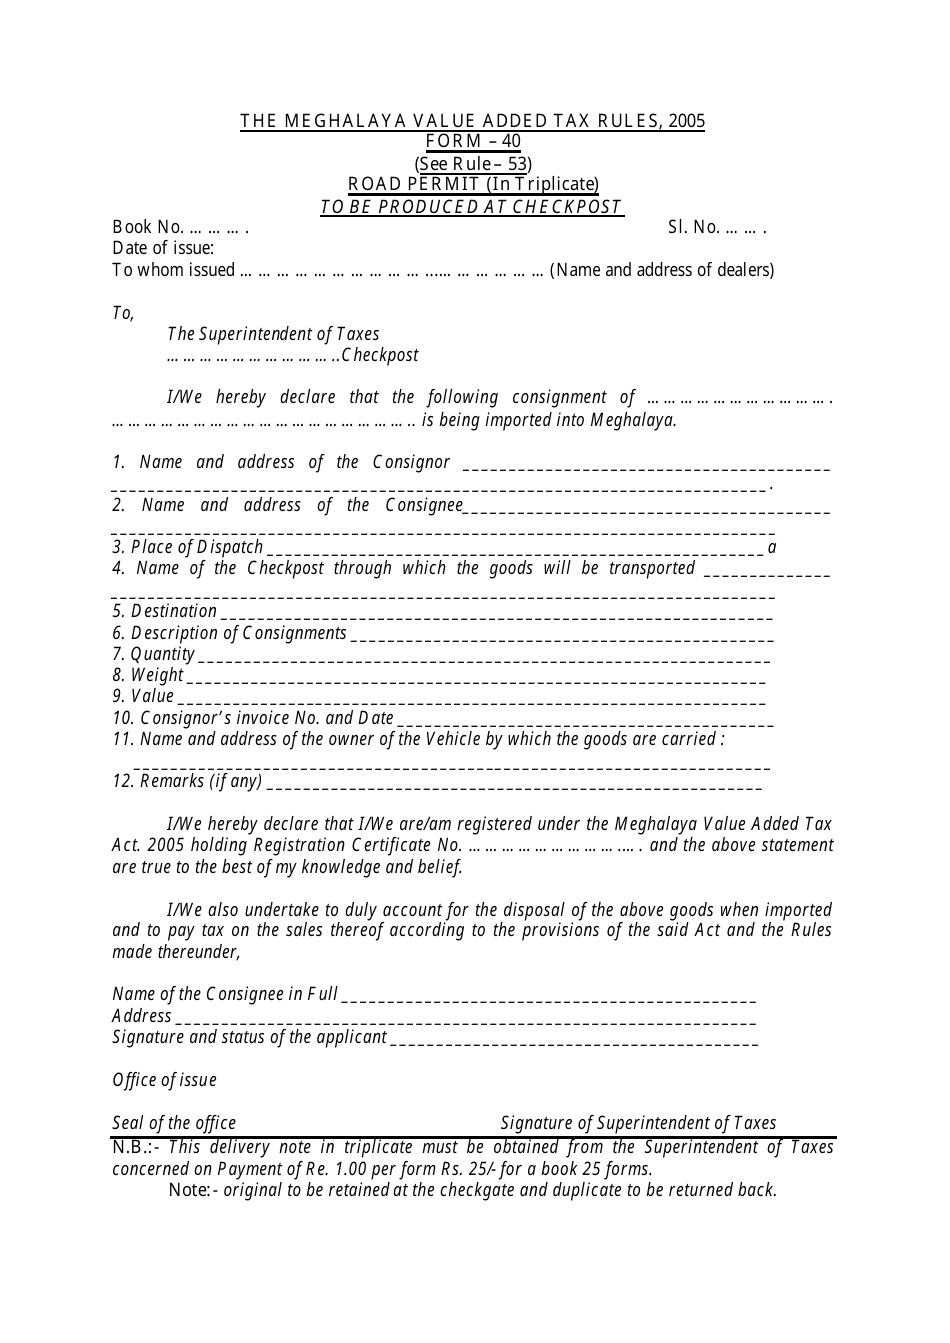 Form 40 Road Permit to Be Produced at Checkpost - Meghalaya, India, Page 1